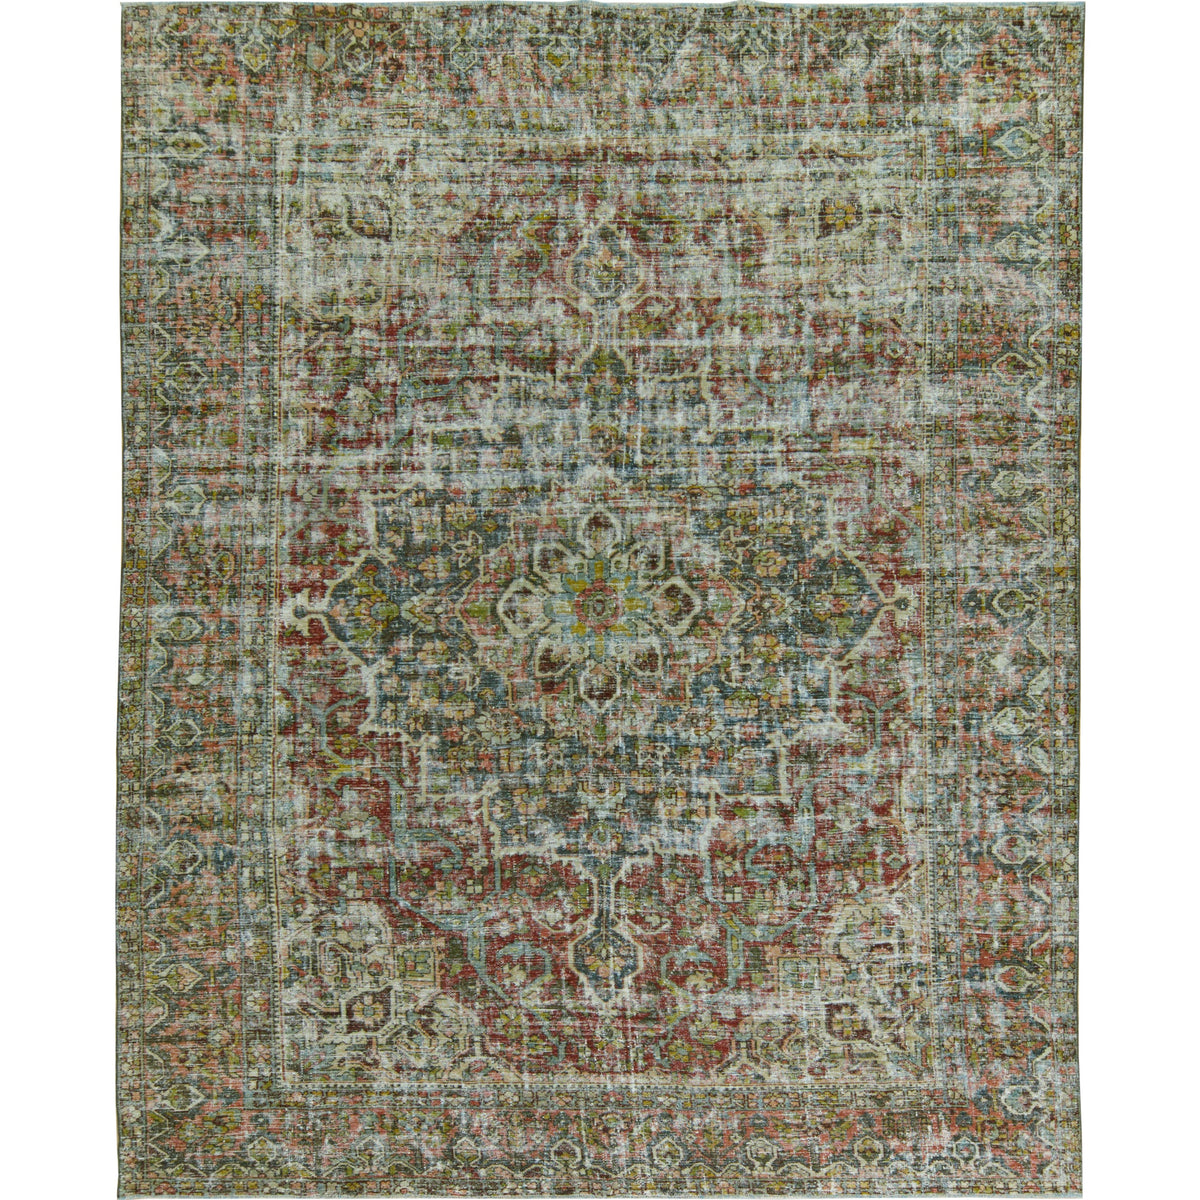 Revelation - Vintage Turkish Rug, Elevating Your Floors with Timeless Beauty | Kuden Rugs